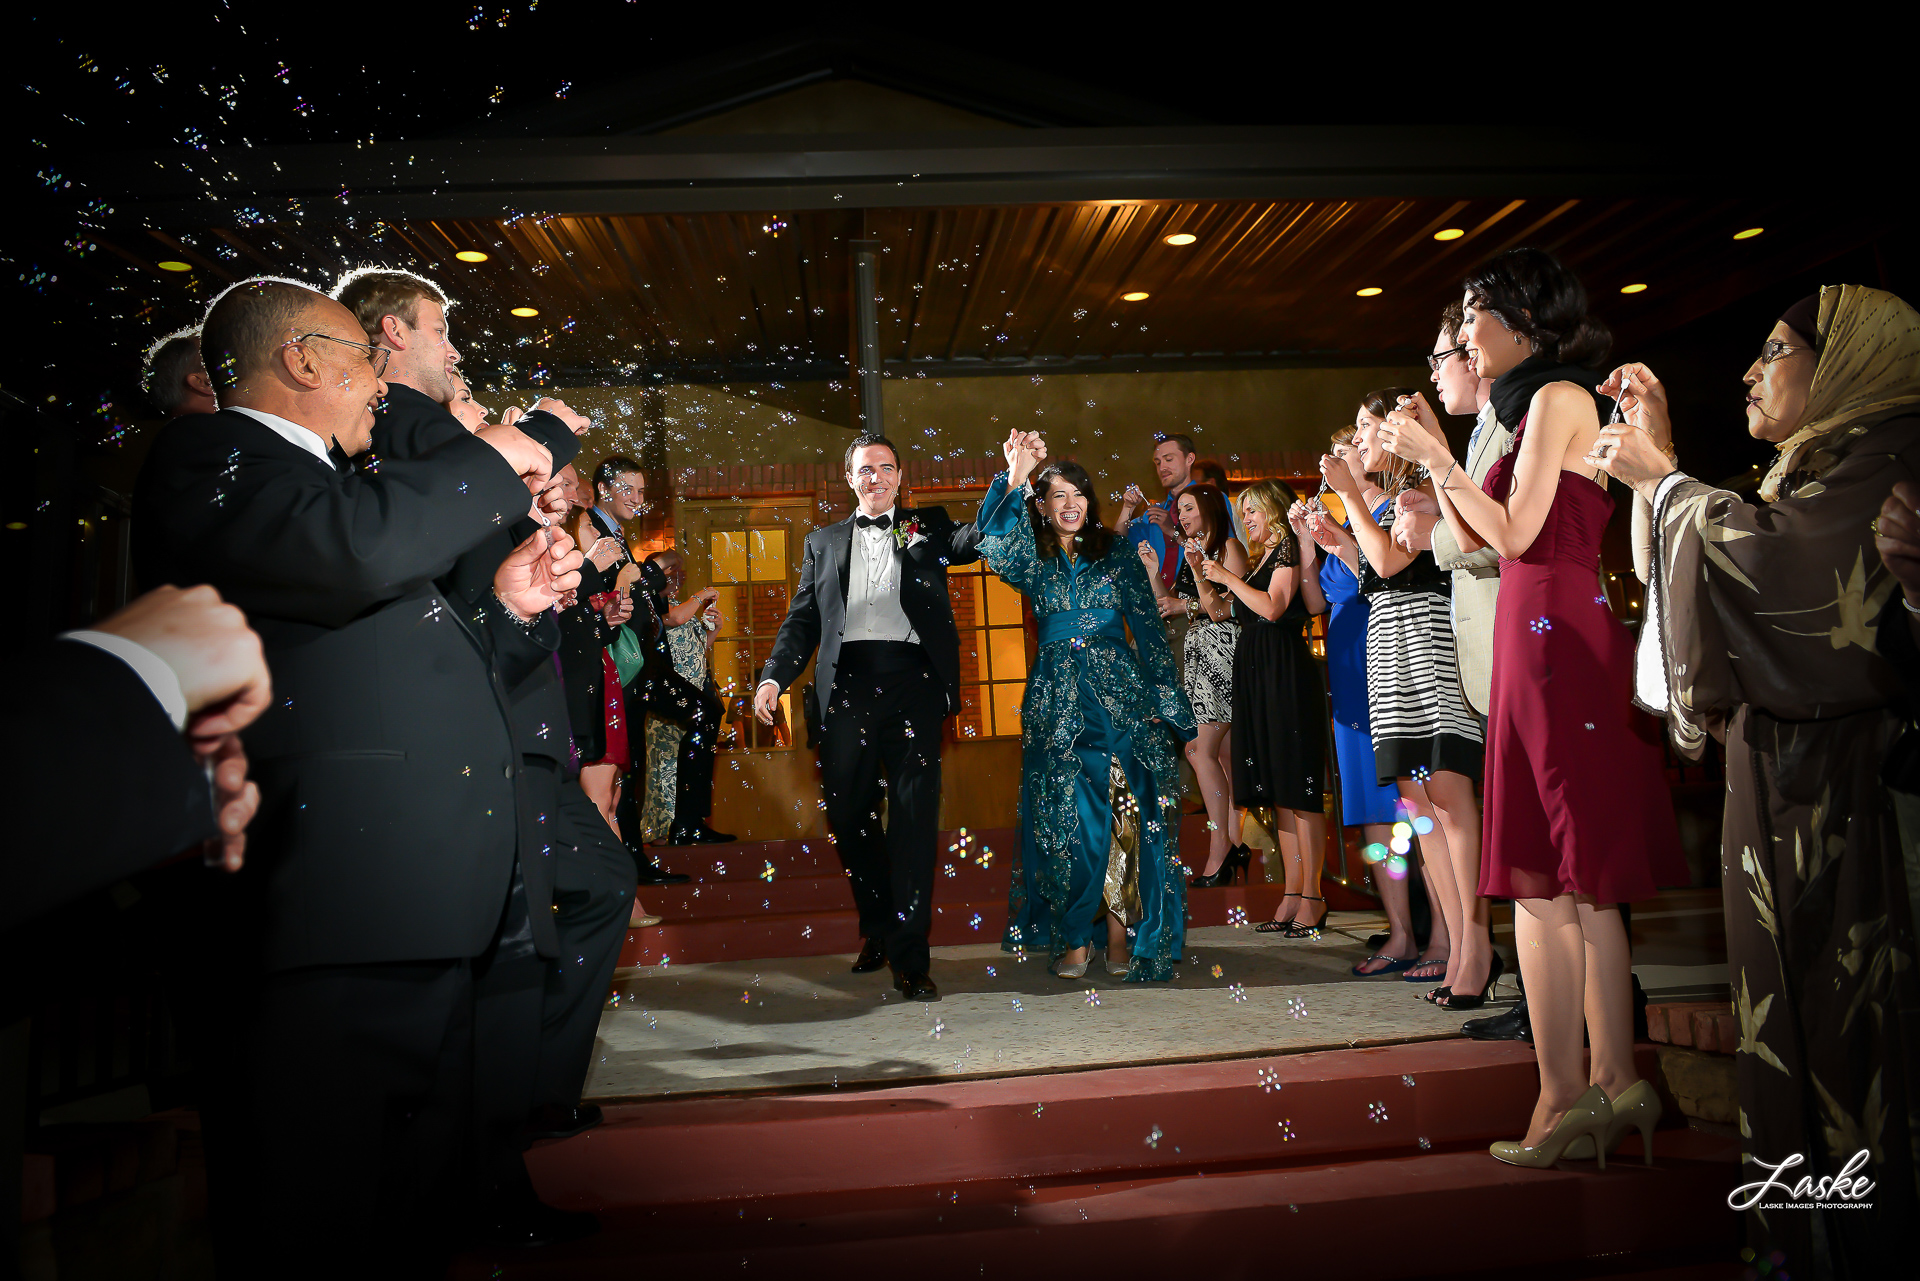 Bride and Groom Leaving the Wedding Reception surrounded by guests blowing bubbles on their wedding day.